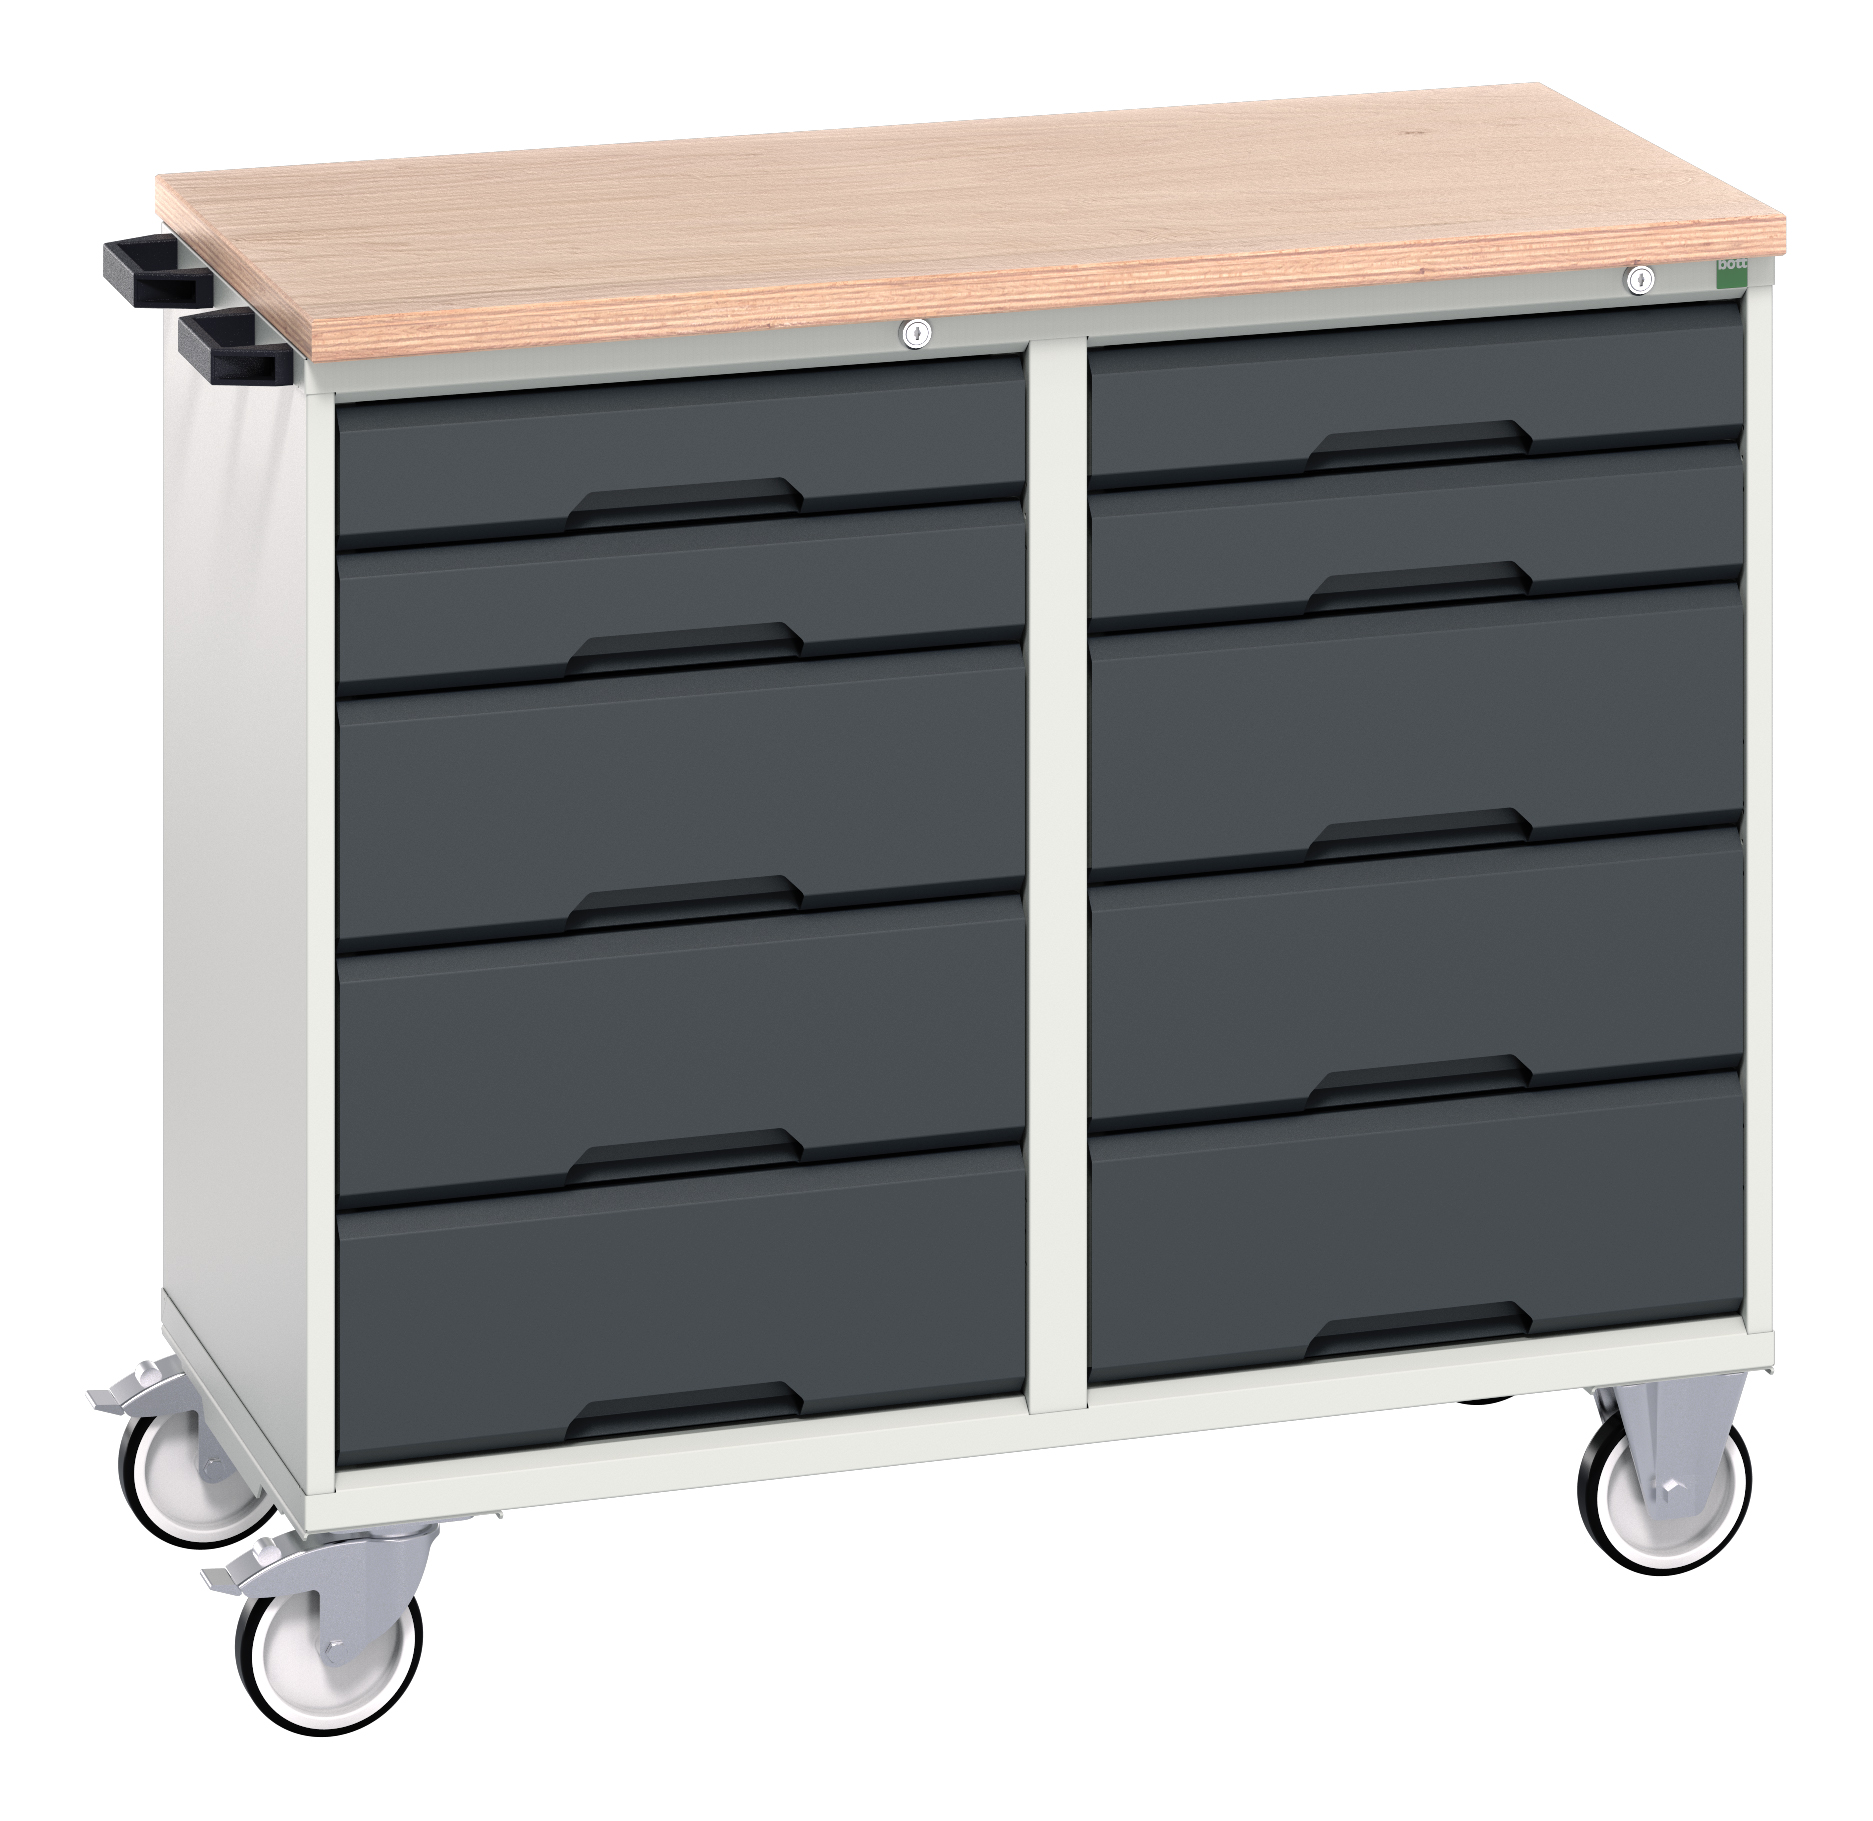 Bott Verso Maintenance Trolley With 10 Drawers & Multiplex Top - 16927101.19